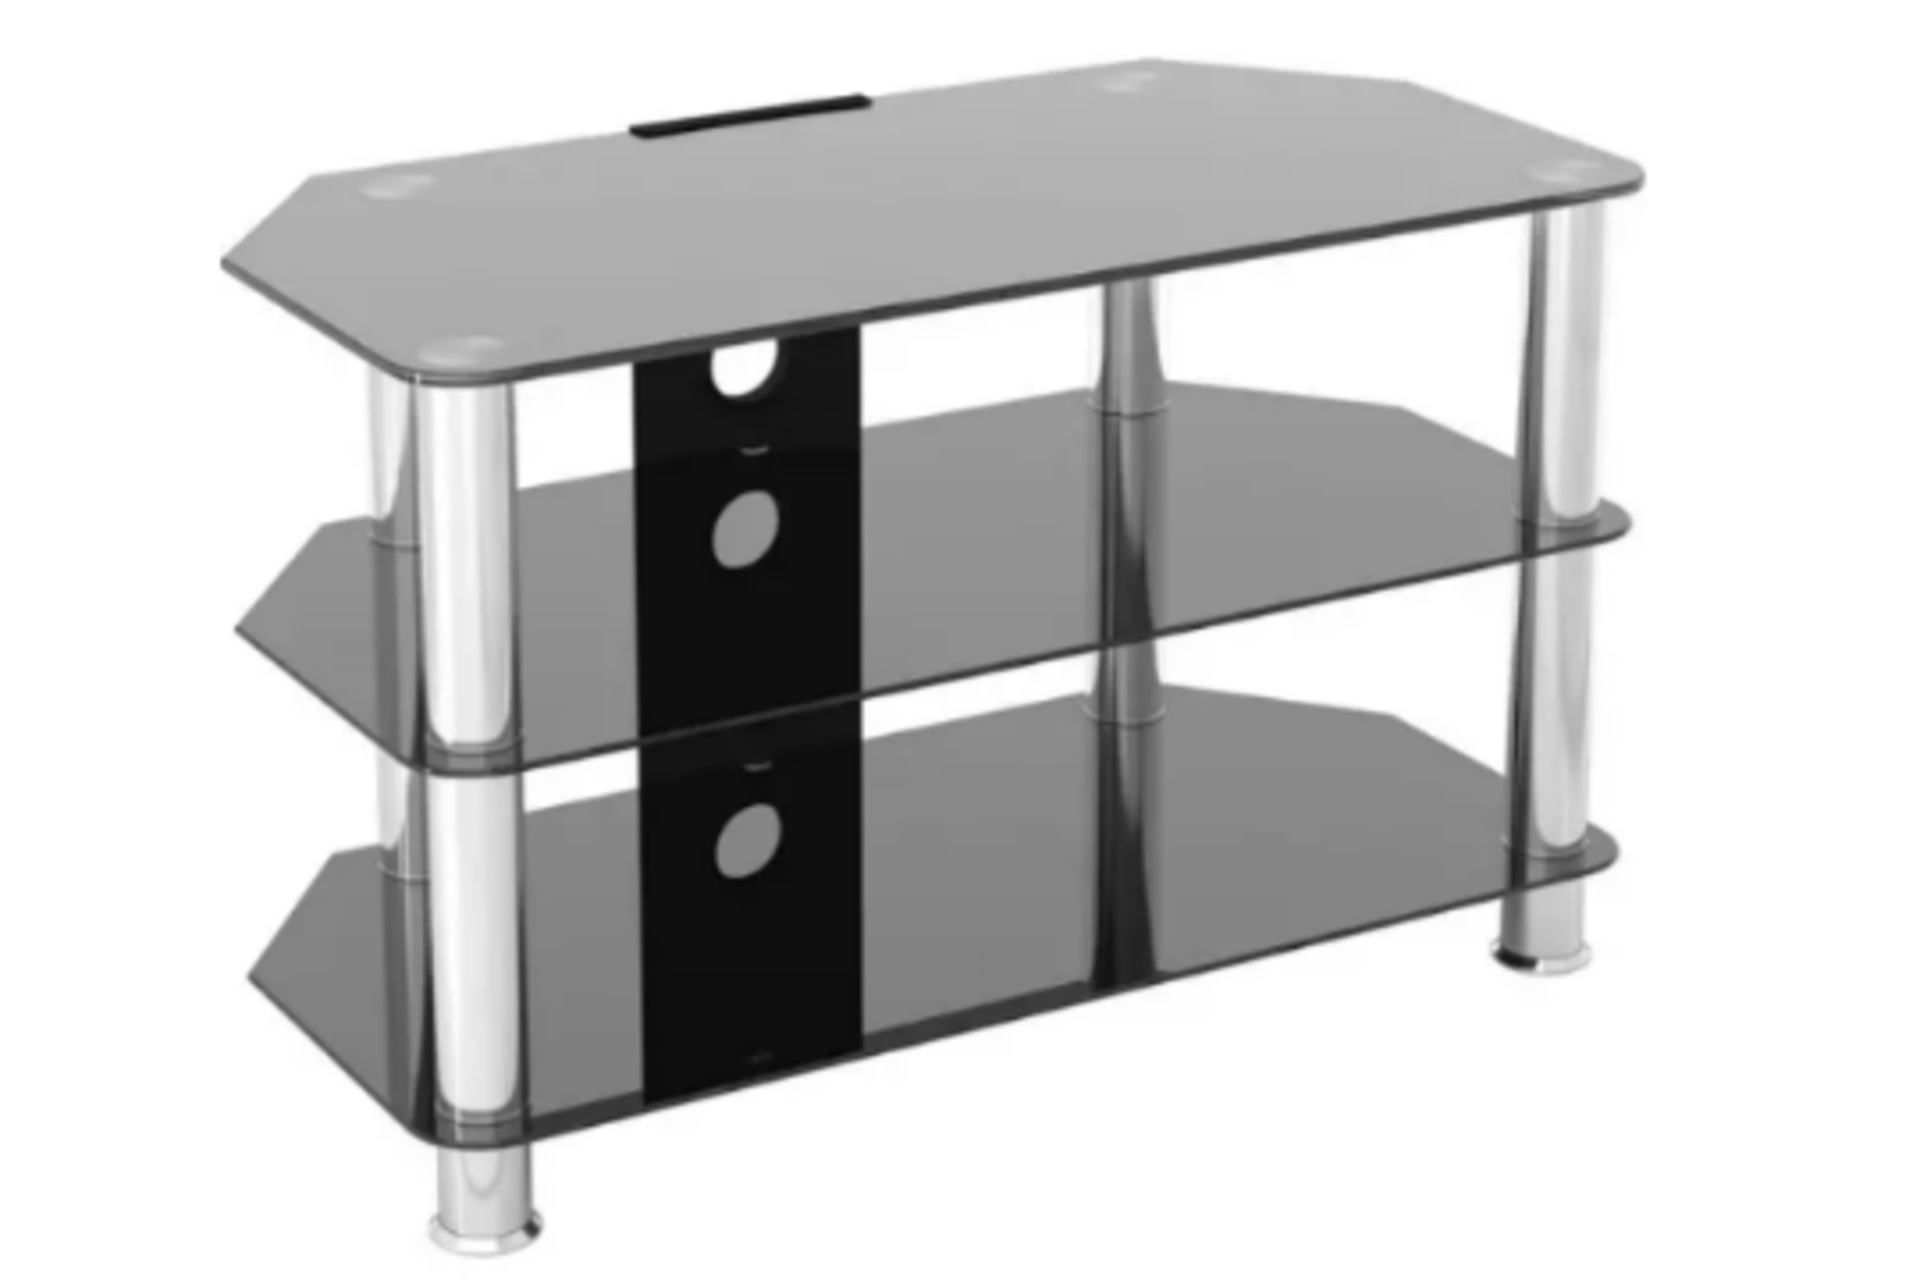 PALLET TO CONTAIN 30 x NEW LIVING GLASS TV STANDS. BLACK TEMPERED GLASS WITH STAINLESS STEEL LEGS. - Image 2 of 5